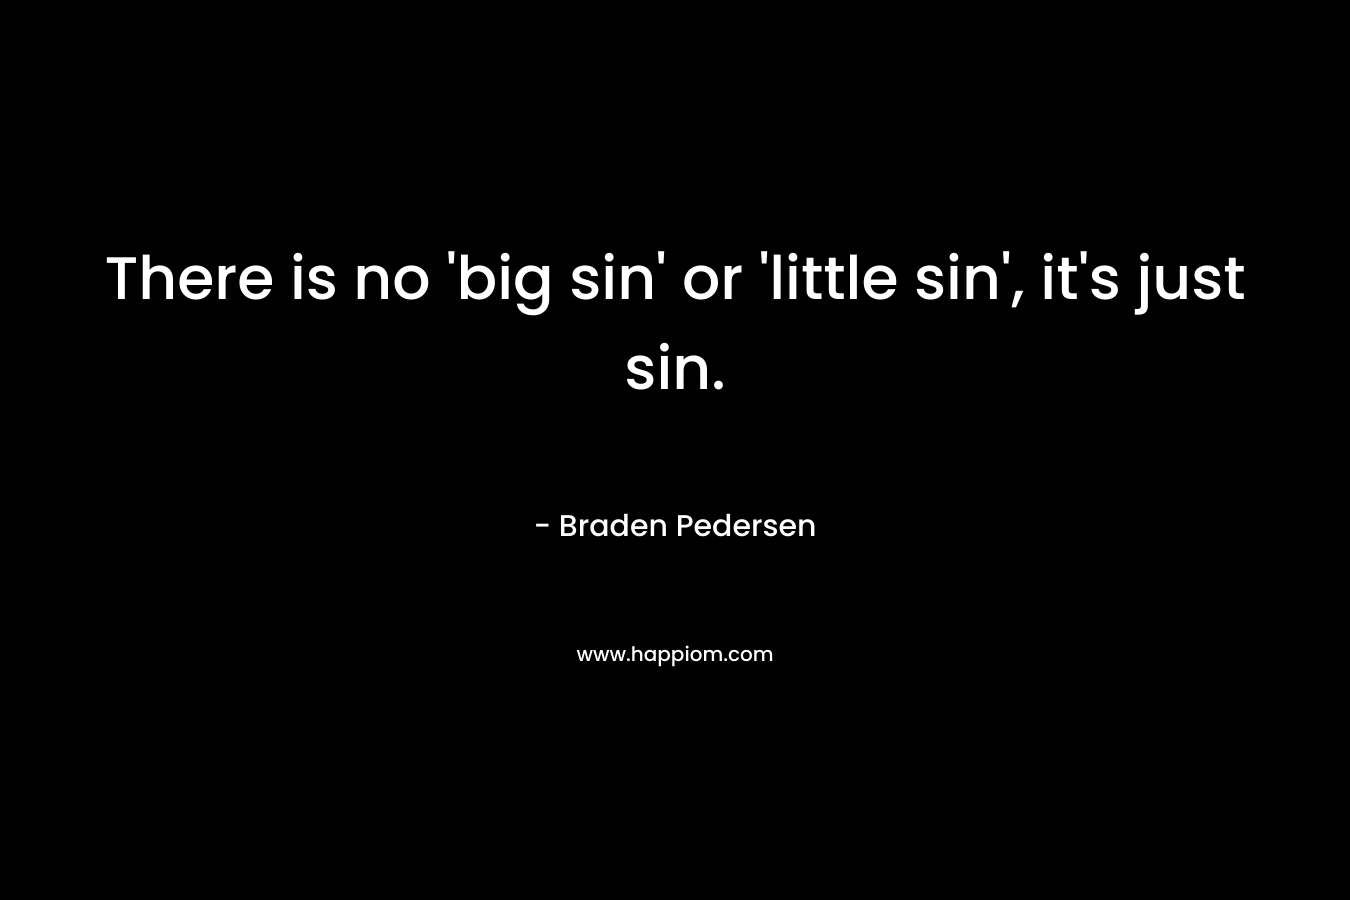 There is no 'big sin' or 'little sin', it's just sin.